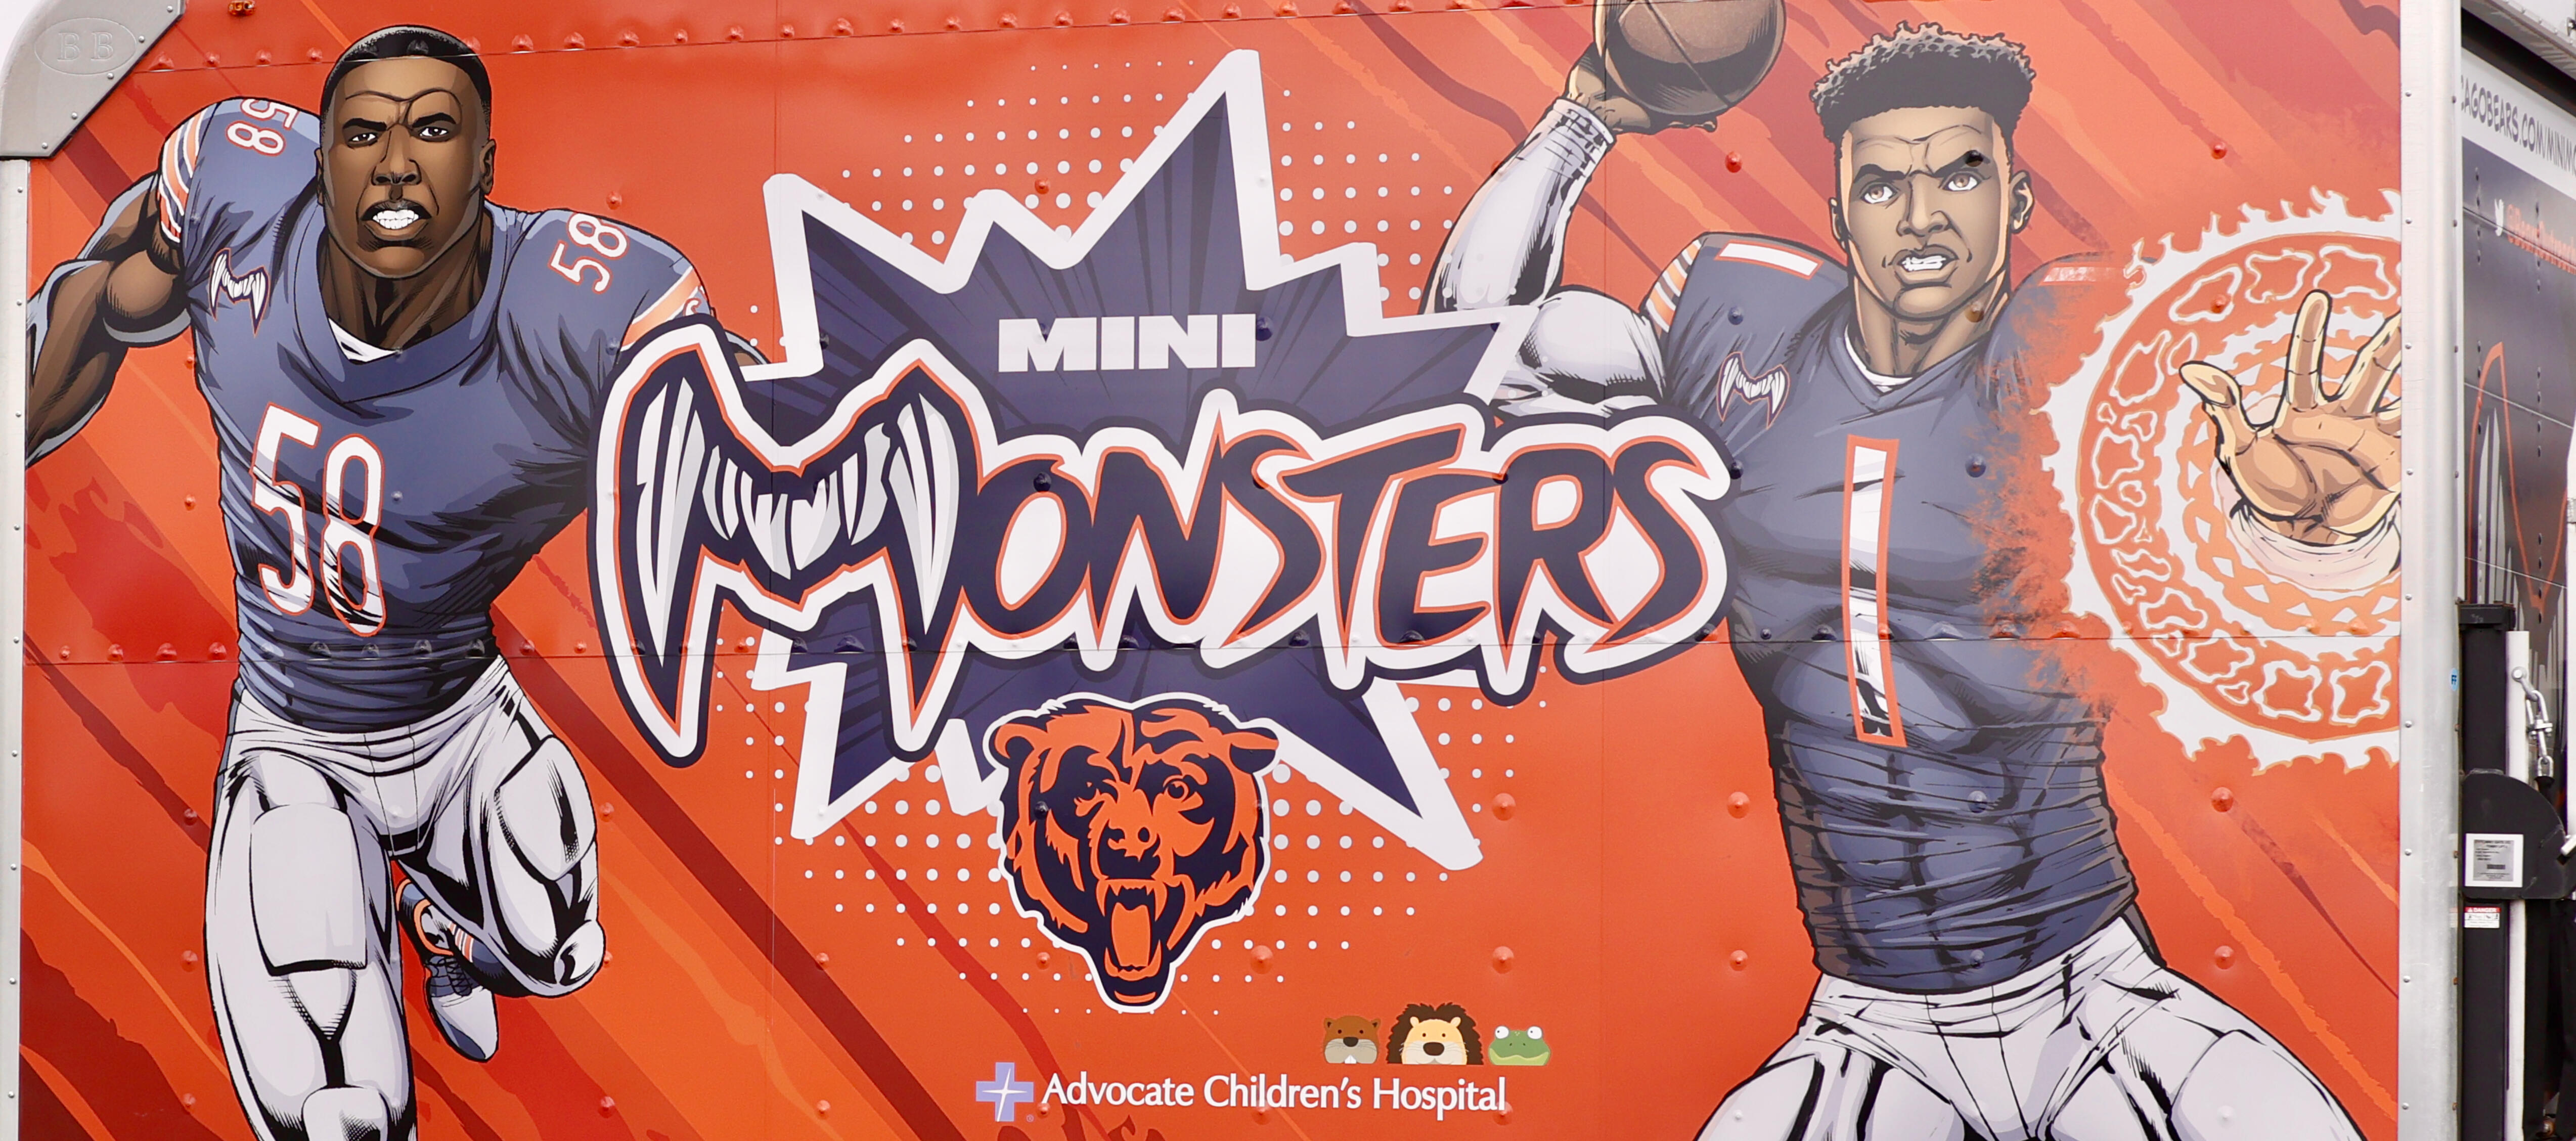 Chicago Bears Mini-Monsters clinic